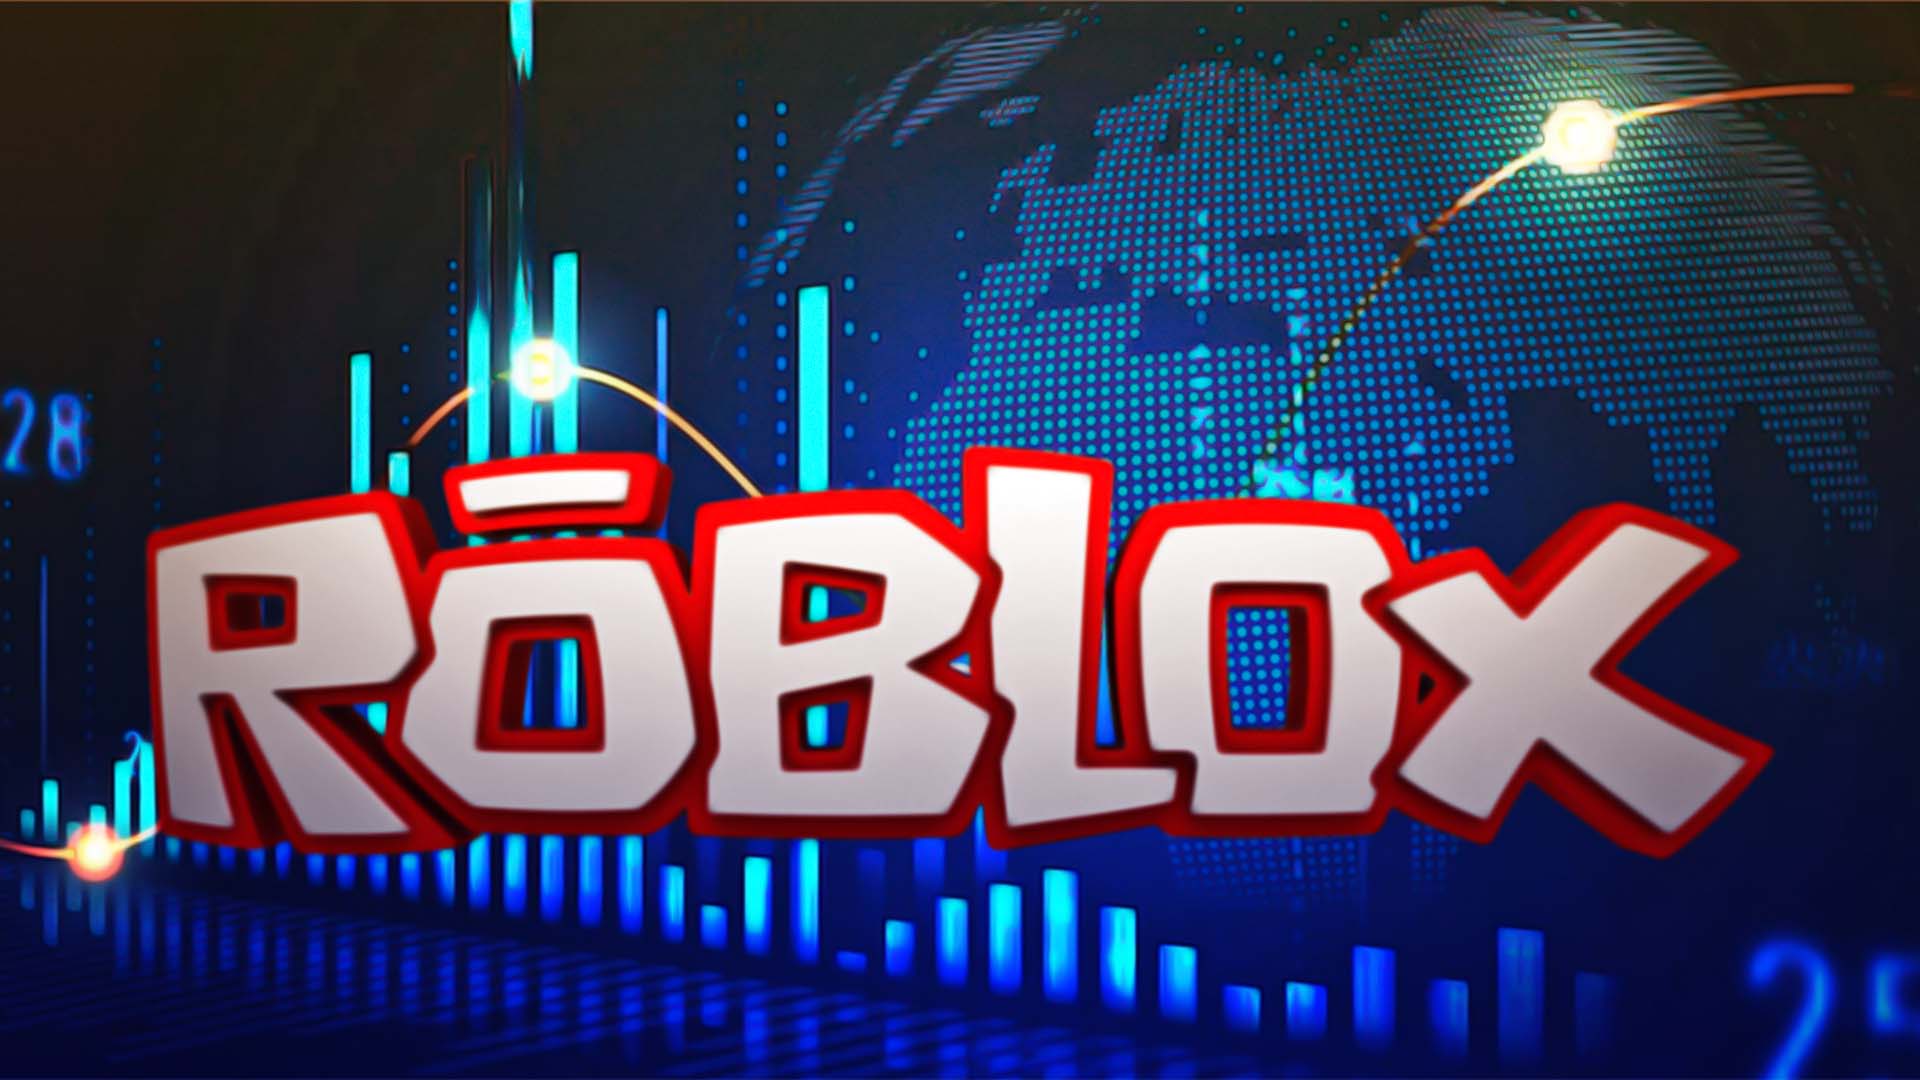 Roblox Corporation (RBLX) Company Profile & Overview - Stock Analysis